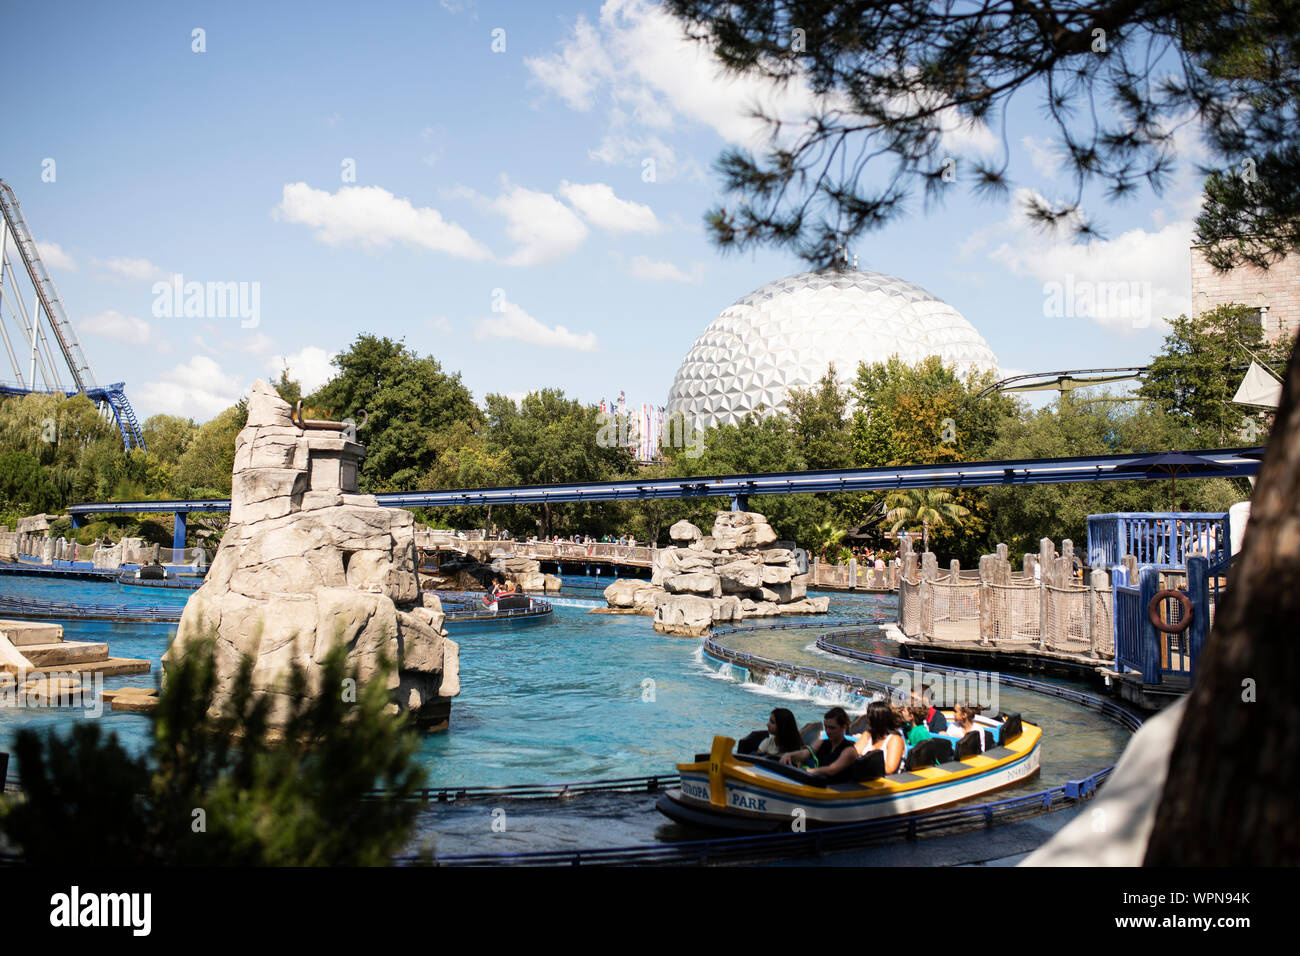 The Poseidon water roller coaster in Europa-Park in Rust, Germany. The Eurosat indoor coaster is in the background. Stock Photo